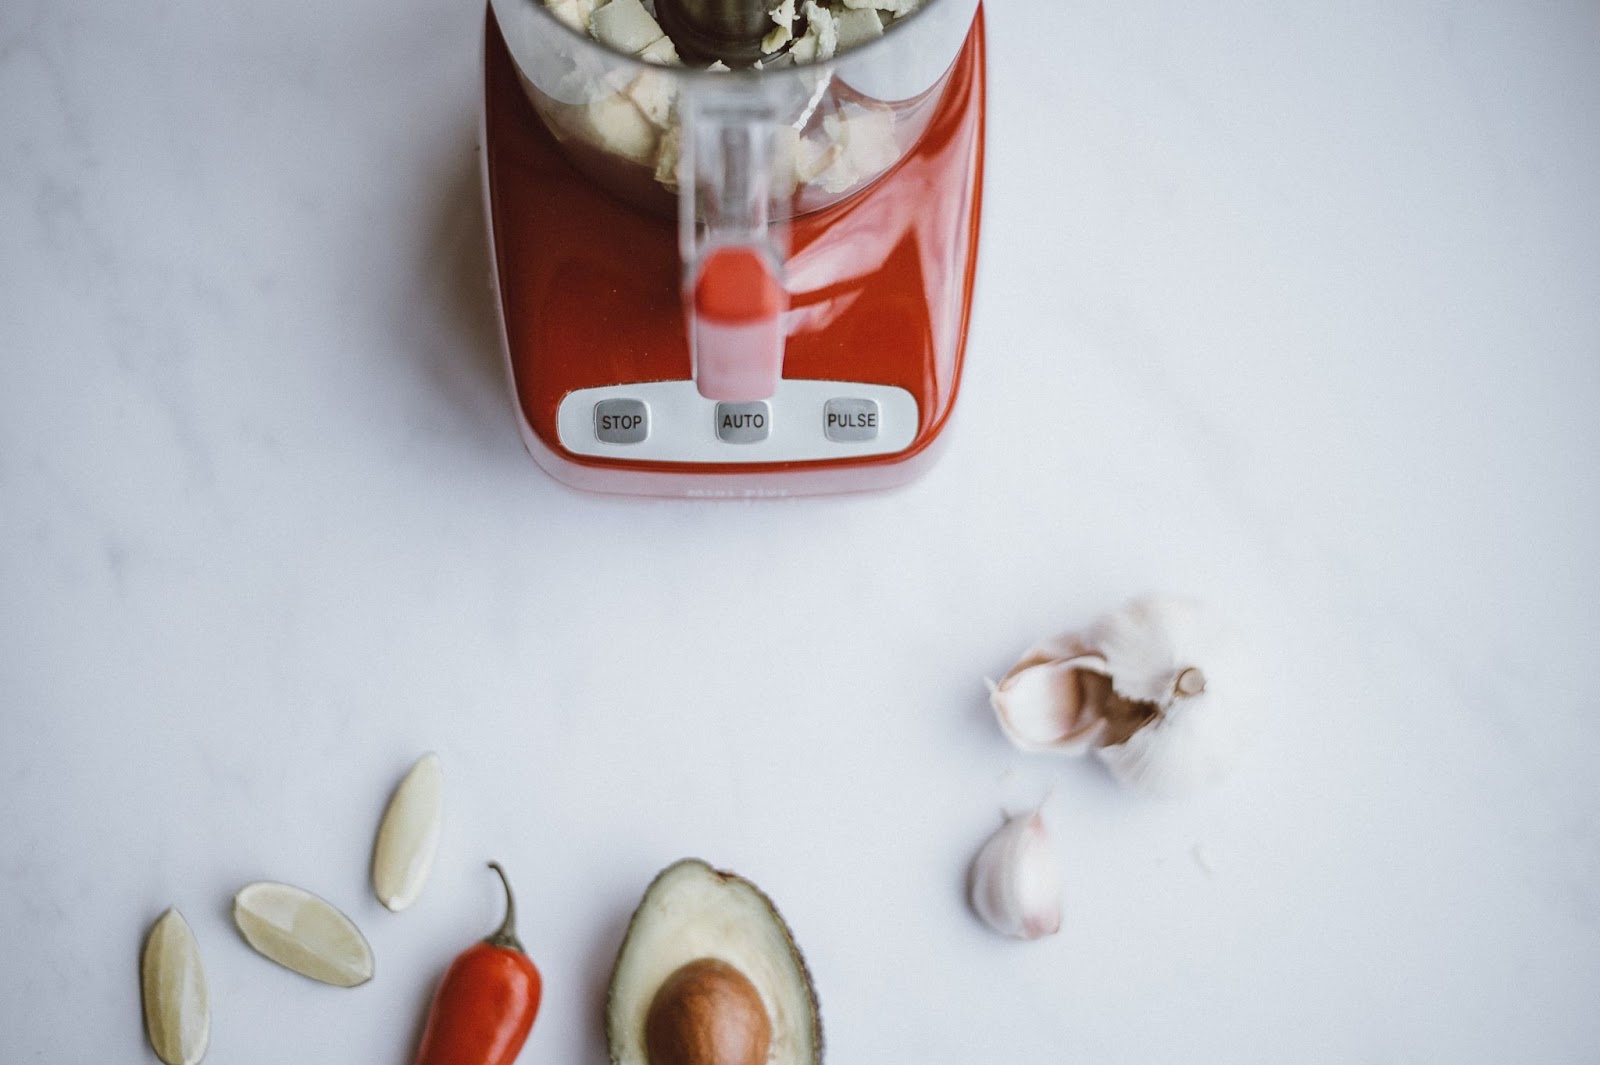 A high-powered hand blender is needed for blending tougher ingredients.